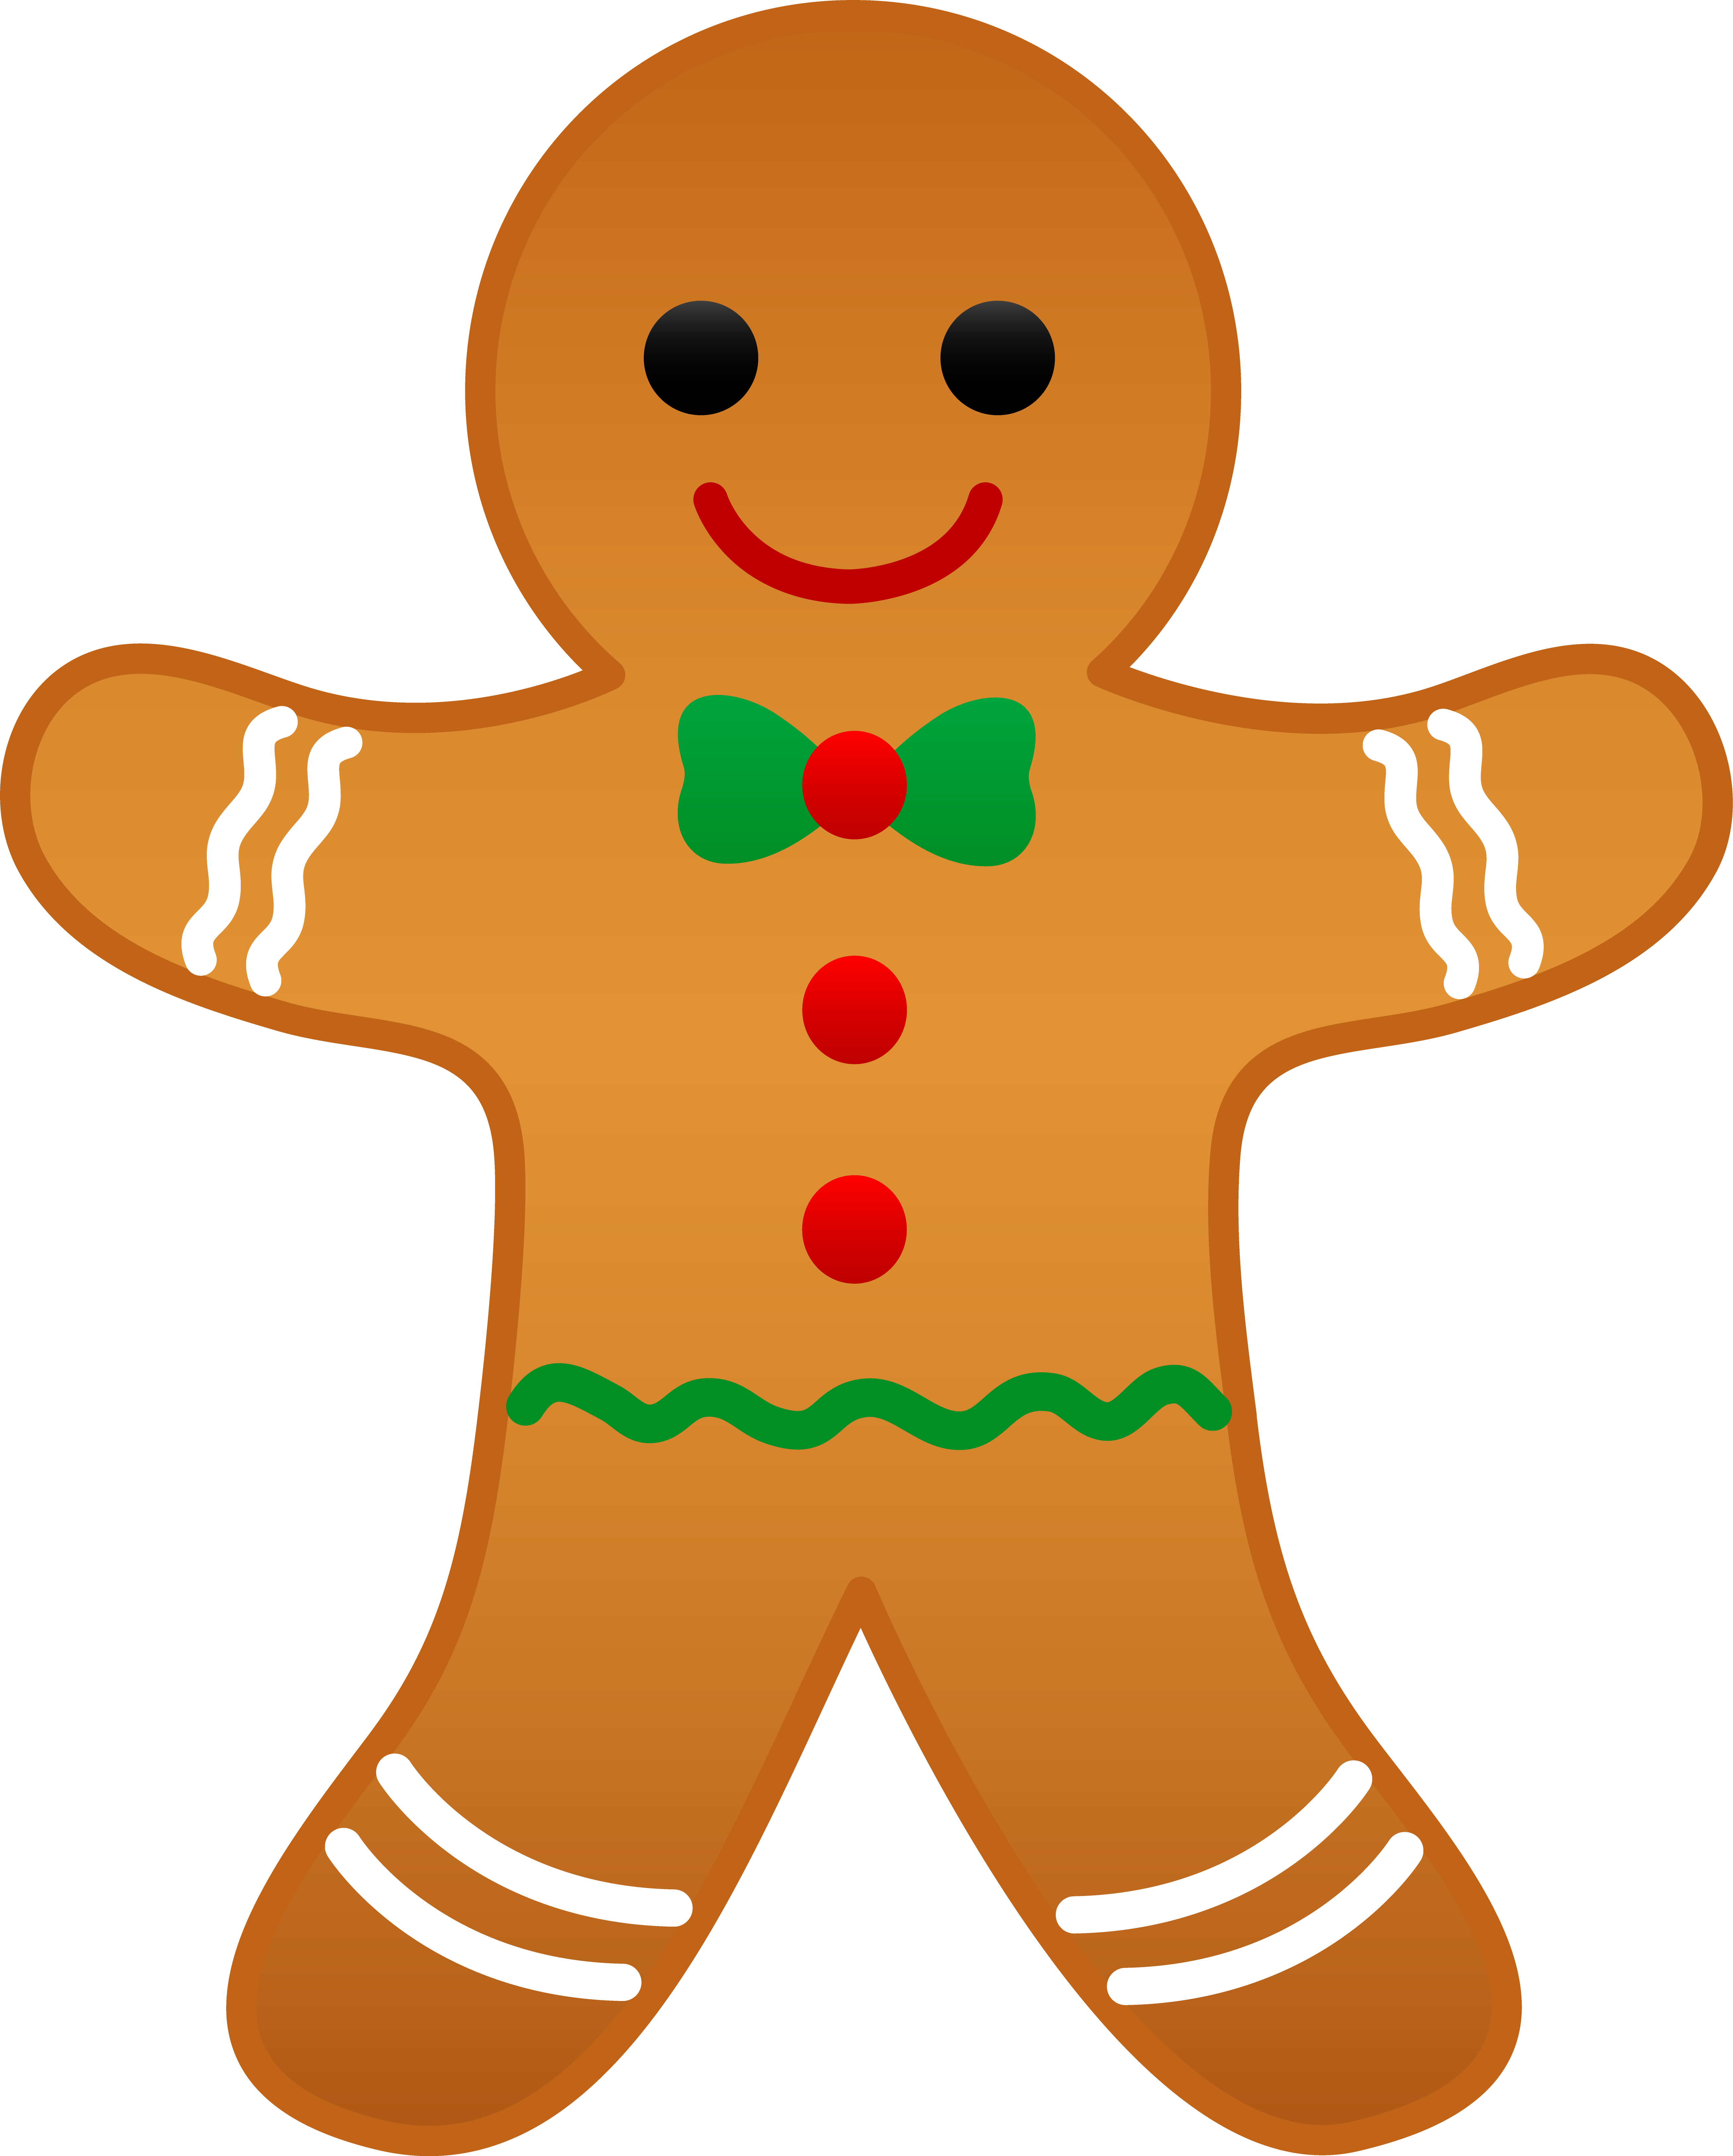 Clipart free cookie. Christmas gingerbread man clip